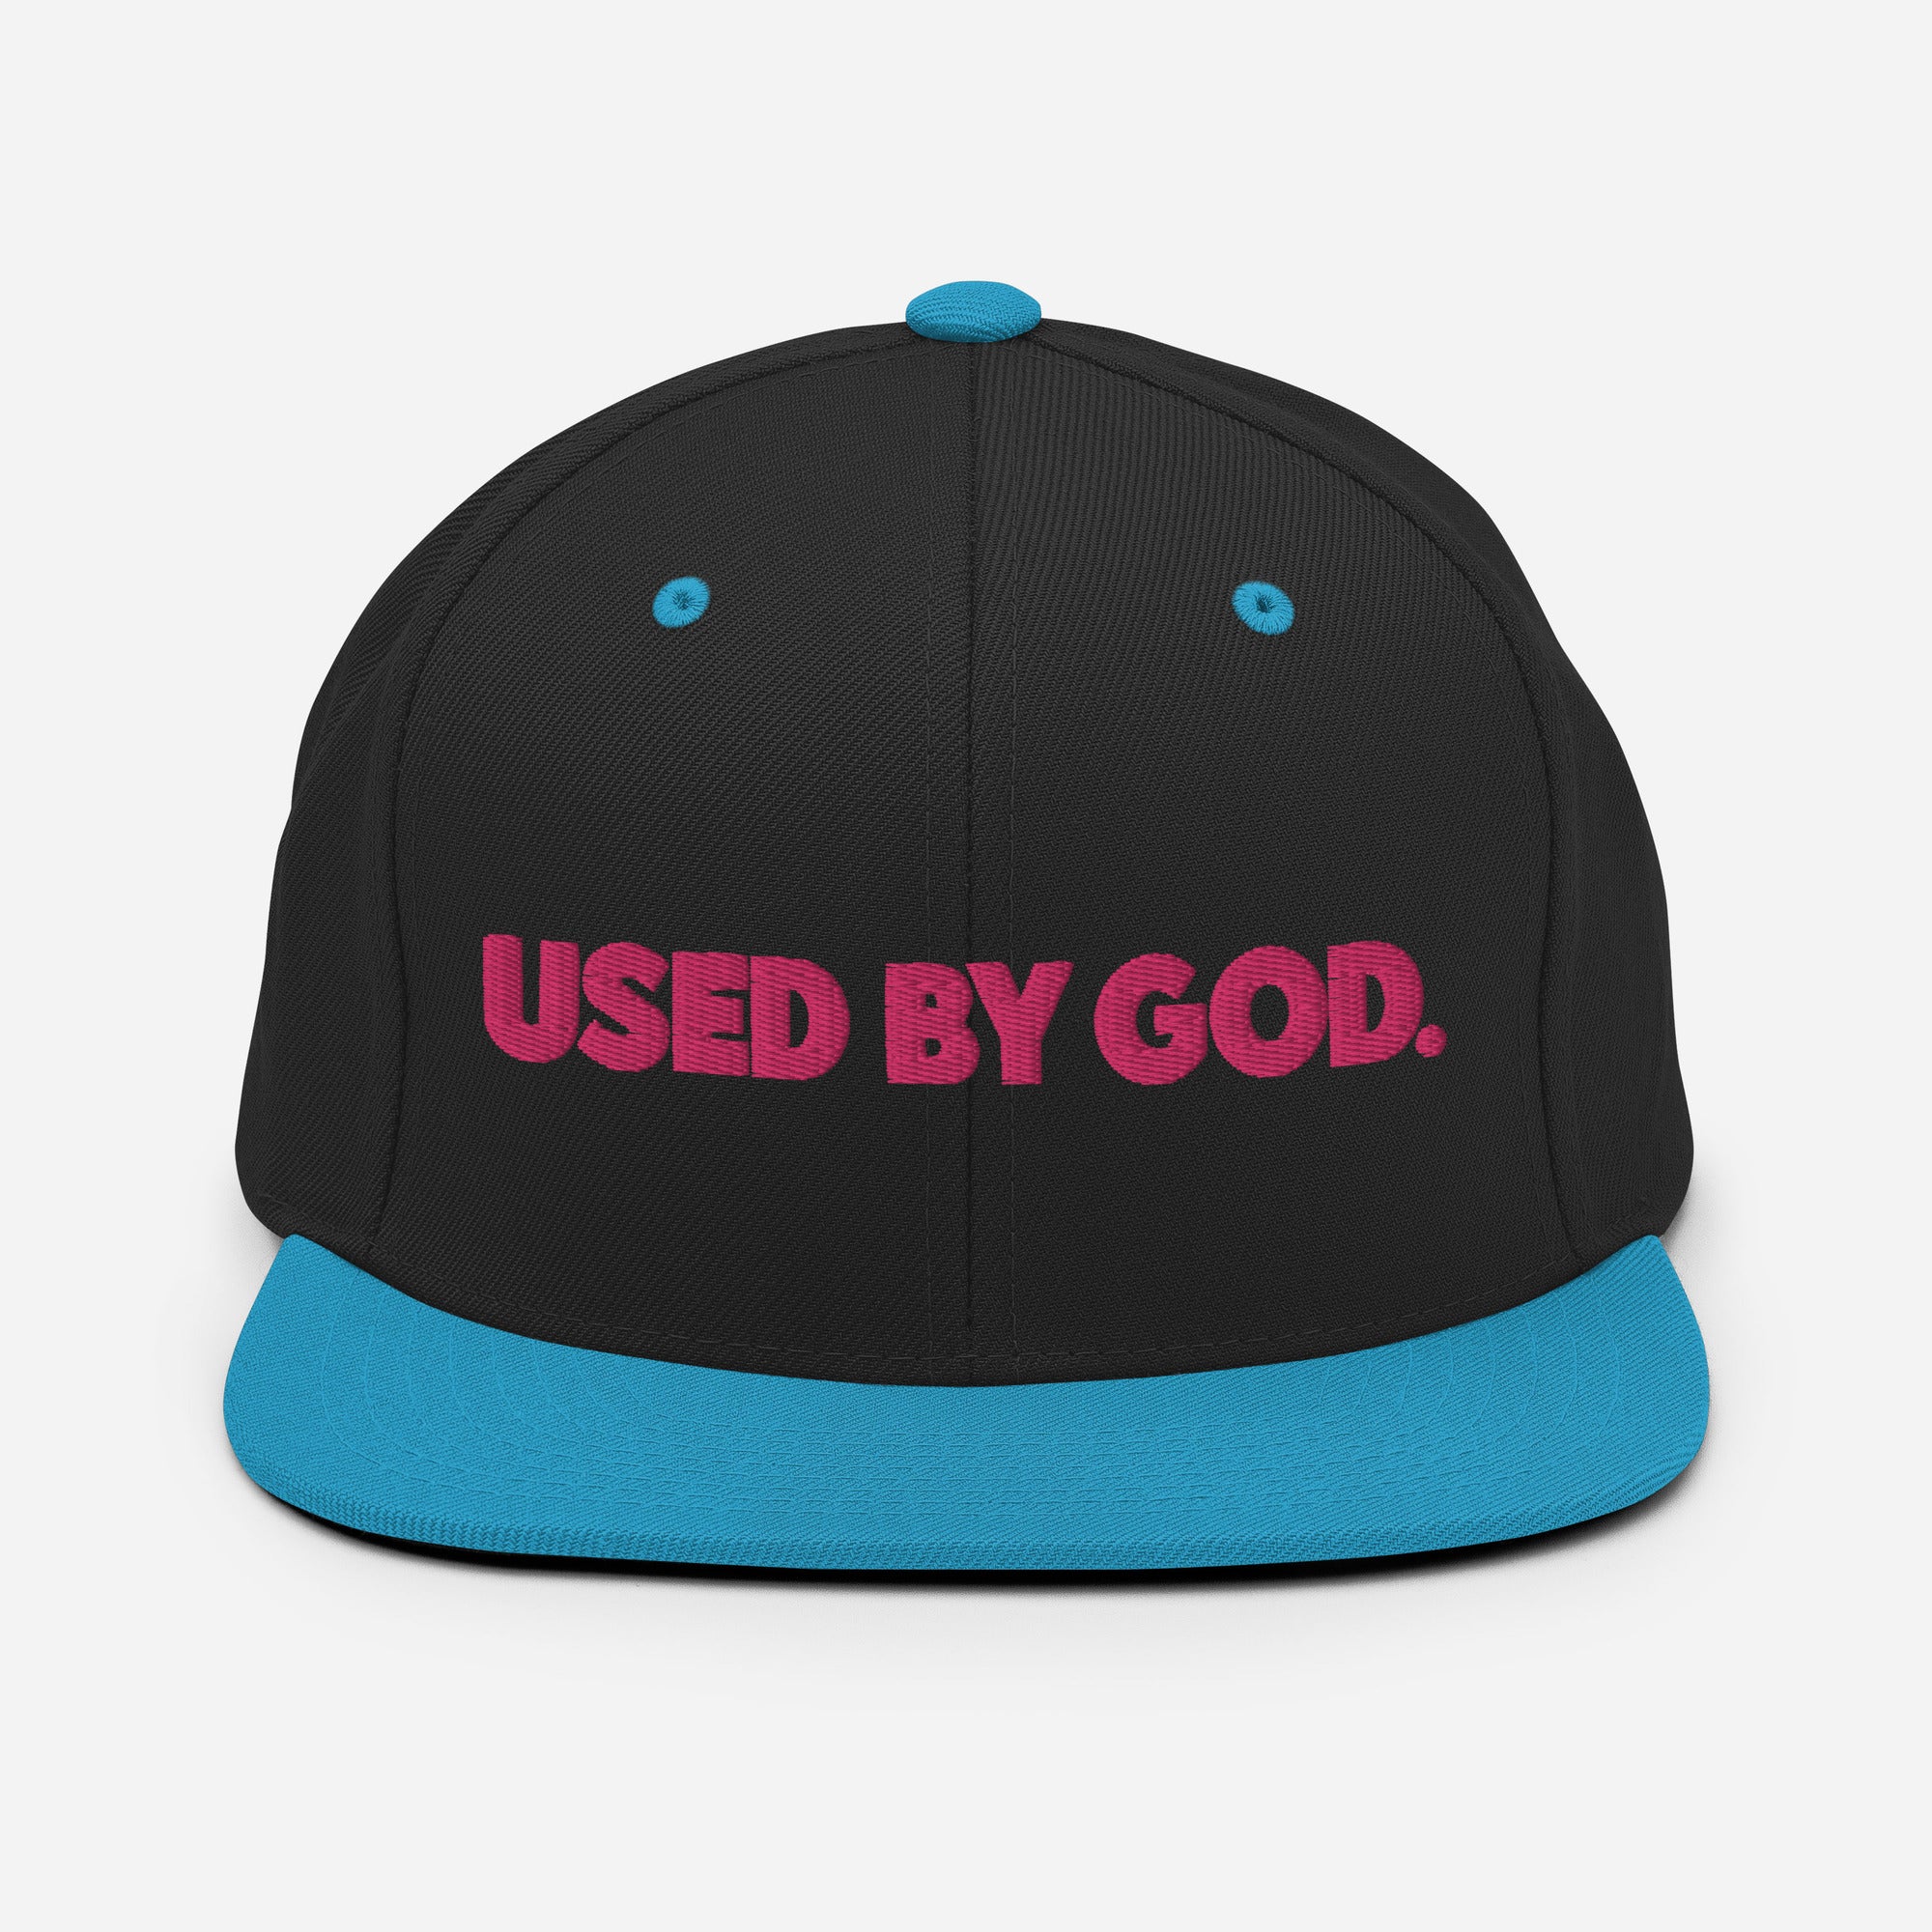 UBG Snapback Hat, Used By God, Used By God Clothing, Christian Apparel, Christian Hats, Christian T-Shirts, Christian Clothing, God Shirts, Christian Sweatshirts, God Clothing, Jesus Hoodie, Jesus Clothes, God Is Dope, Art Of Homage, Red Letter Clothing, Elevated Faith, Active Faith Sports, Beacon Threads, God The Father Apparel